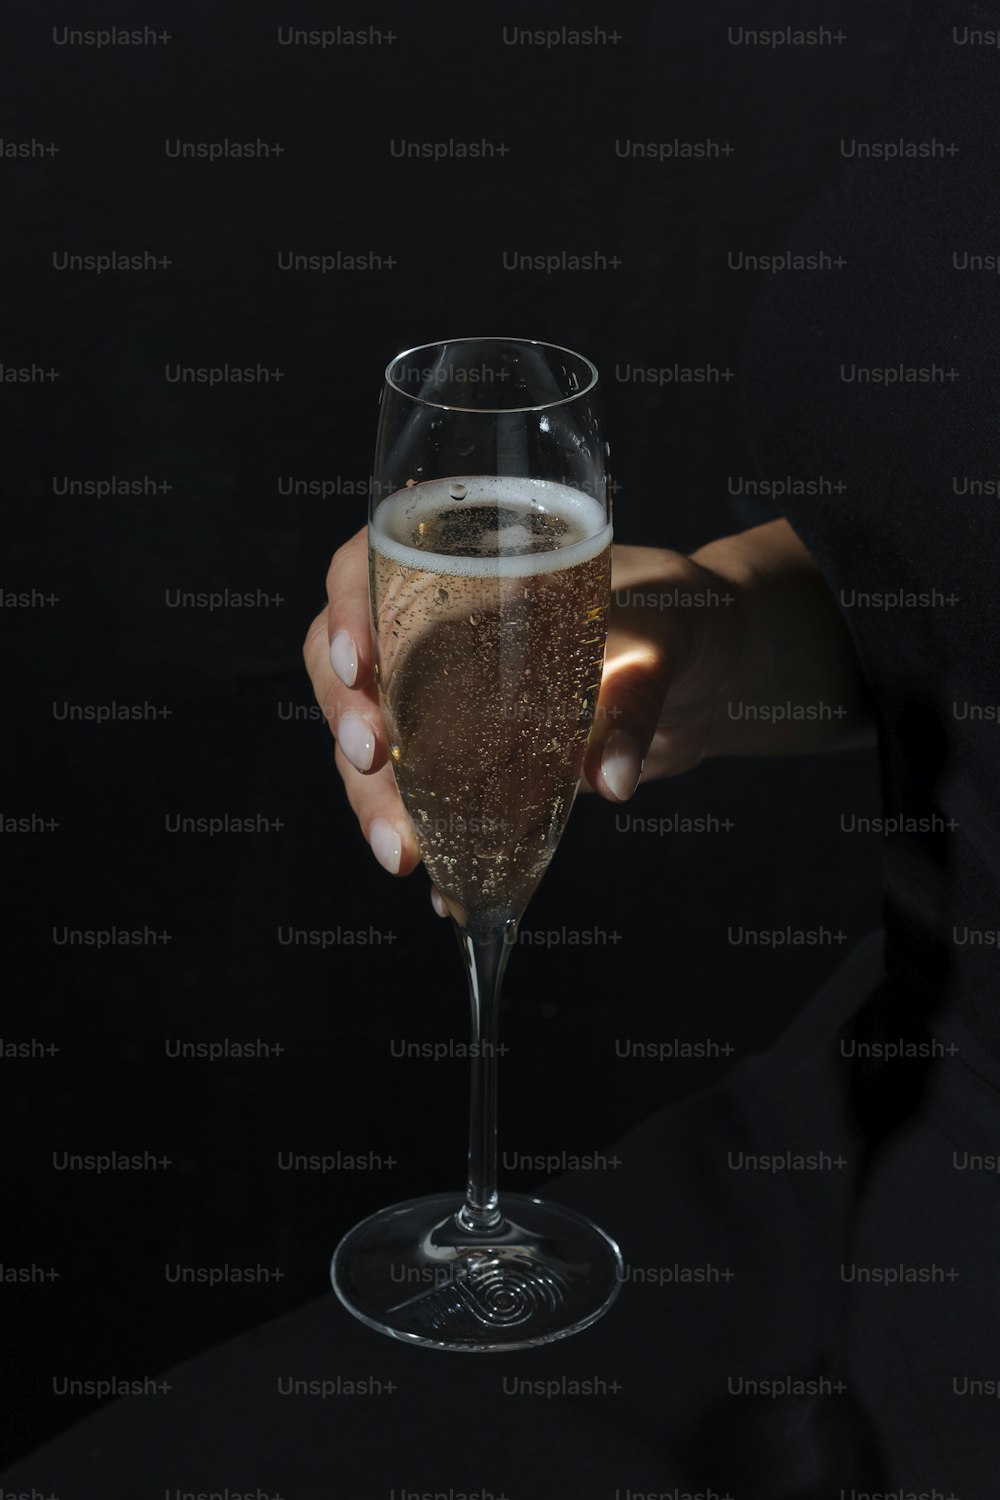 Woman helding a glass of Prosecco, an italian sparkling wine, dark and moody